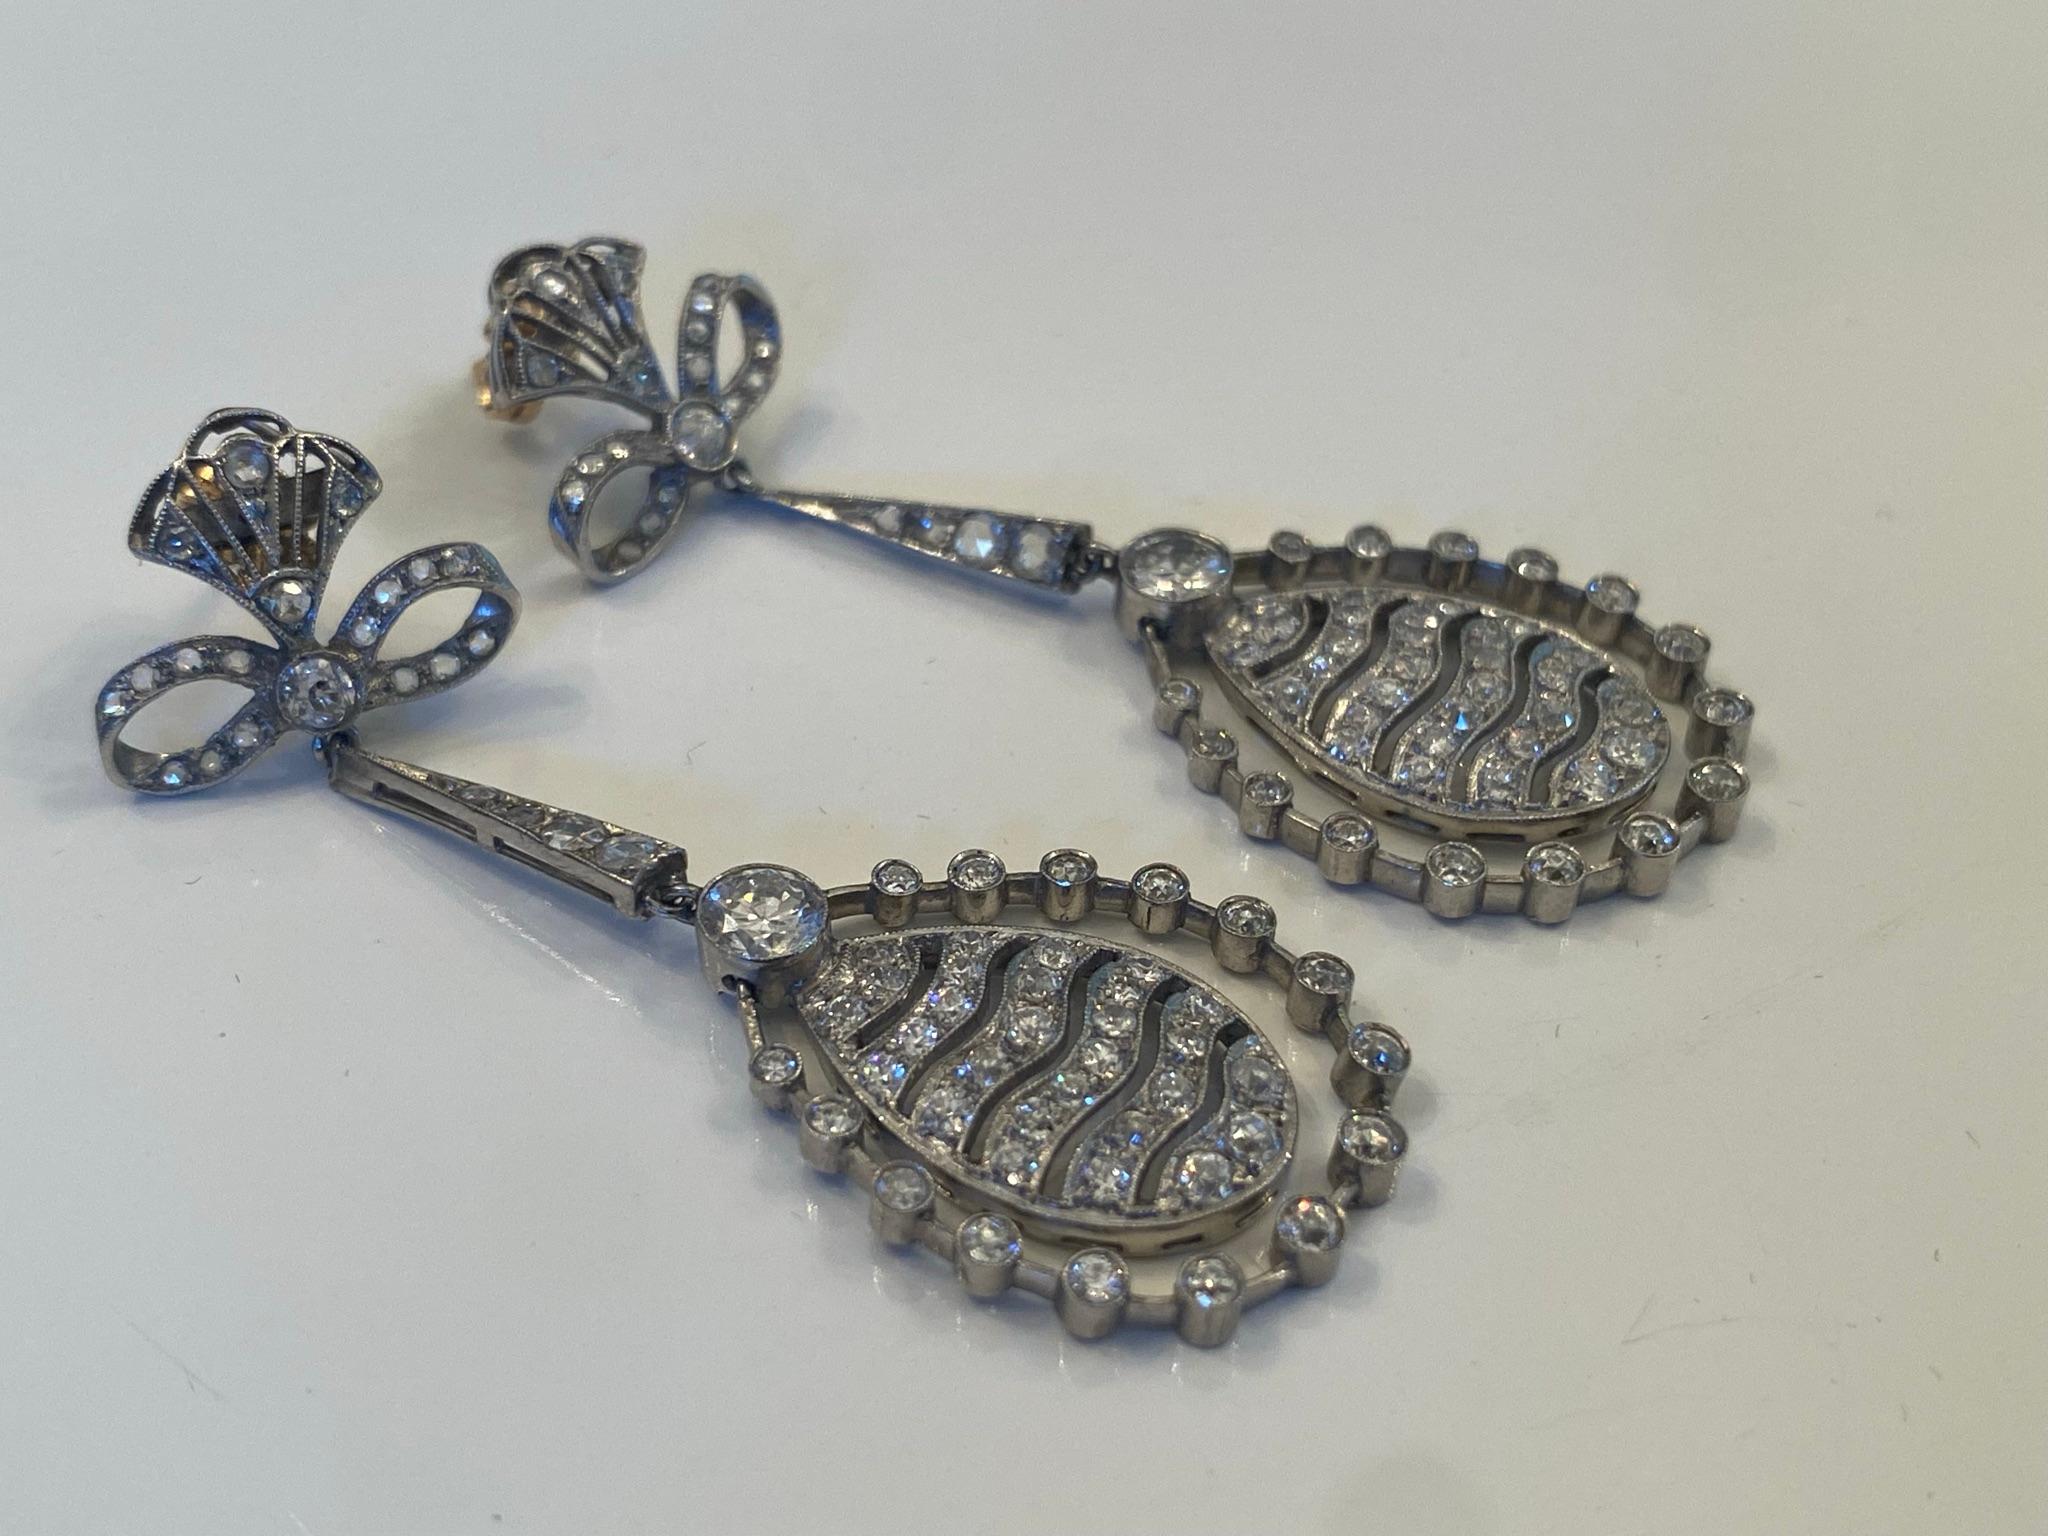 Crafted in the 1920s from platinum, these stunning Art Deco chandelier earrings feature approximately 2.75 carats of Old European cut and rose cut diamonds arrayed over a dangling and fanciful design of bows and ovals and halos. The earrings measure